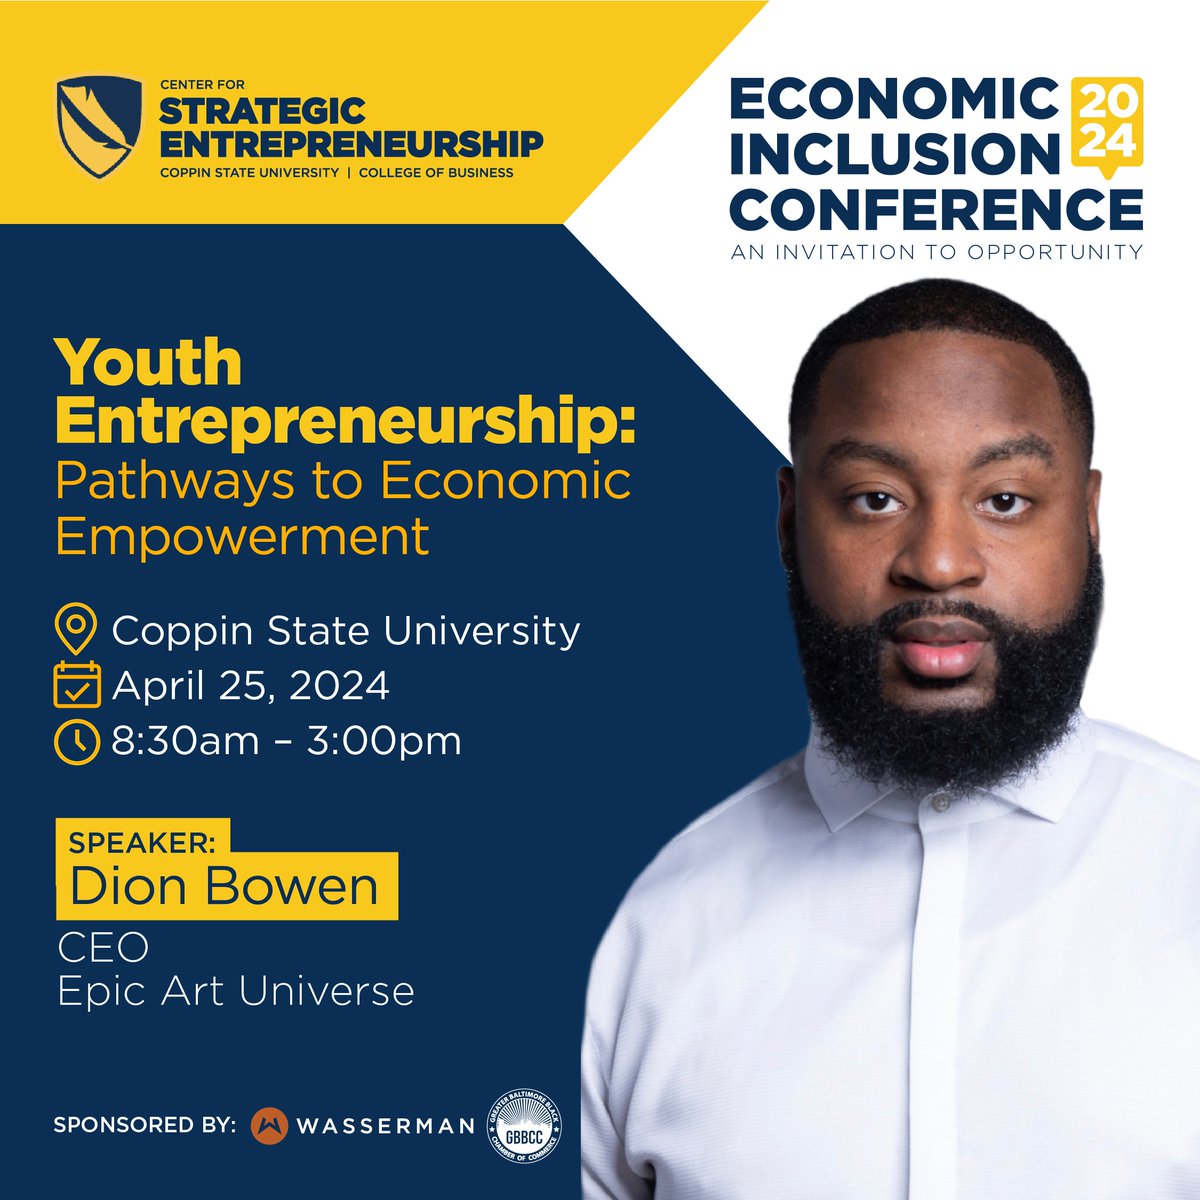 Learn from Dion Bowen, CEO of Epic Art Universe, as he empowers the next generation to break through barriers and thrive despite challenging circumstances, helping them discover and pursue their passions. Register at: coppin.edu/eicac #EICAC2024 #Entrepreneurship